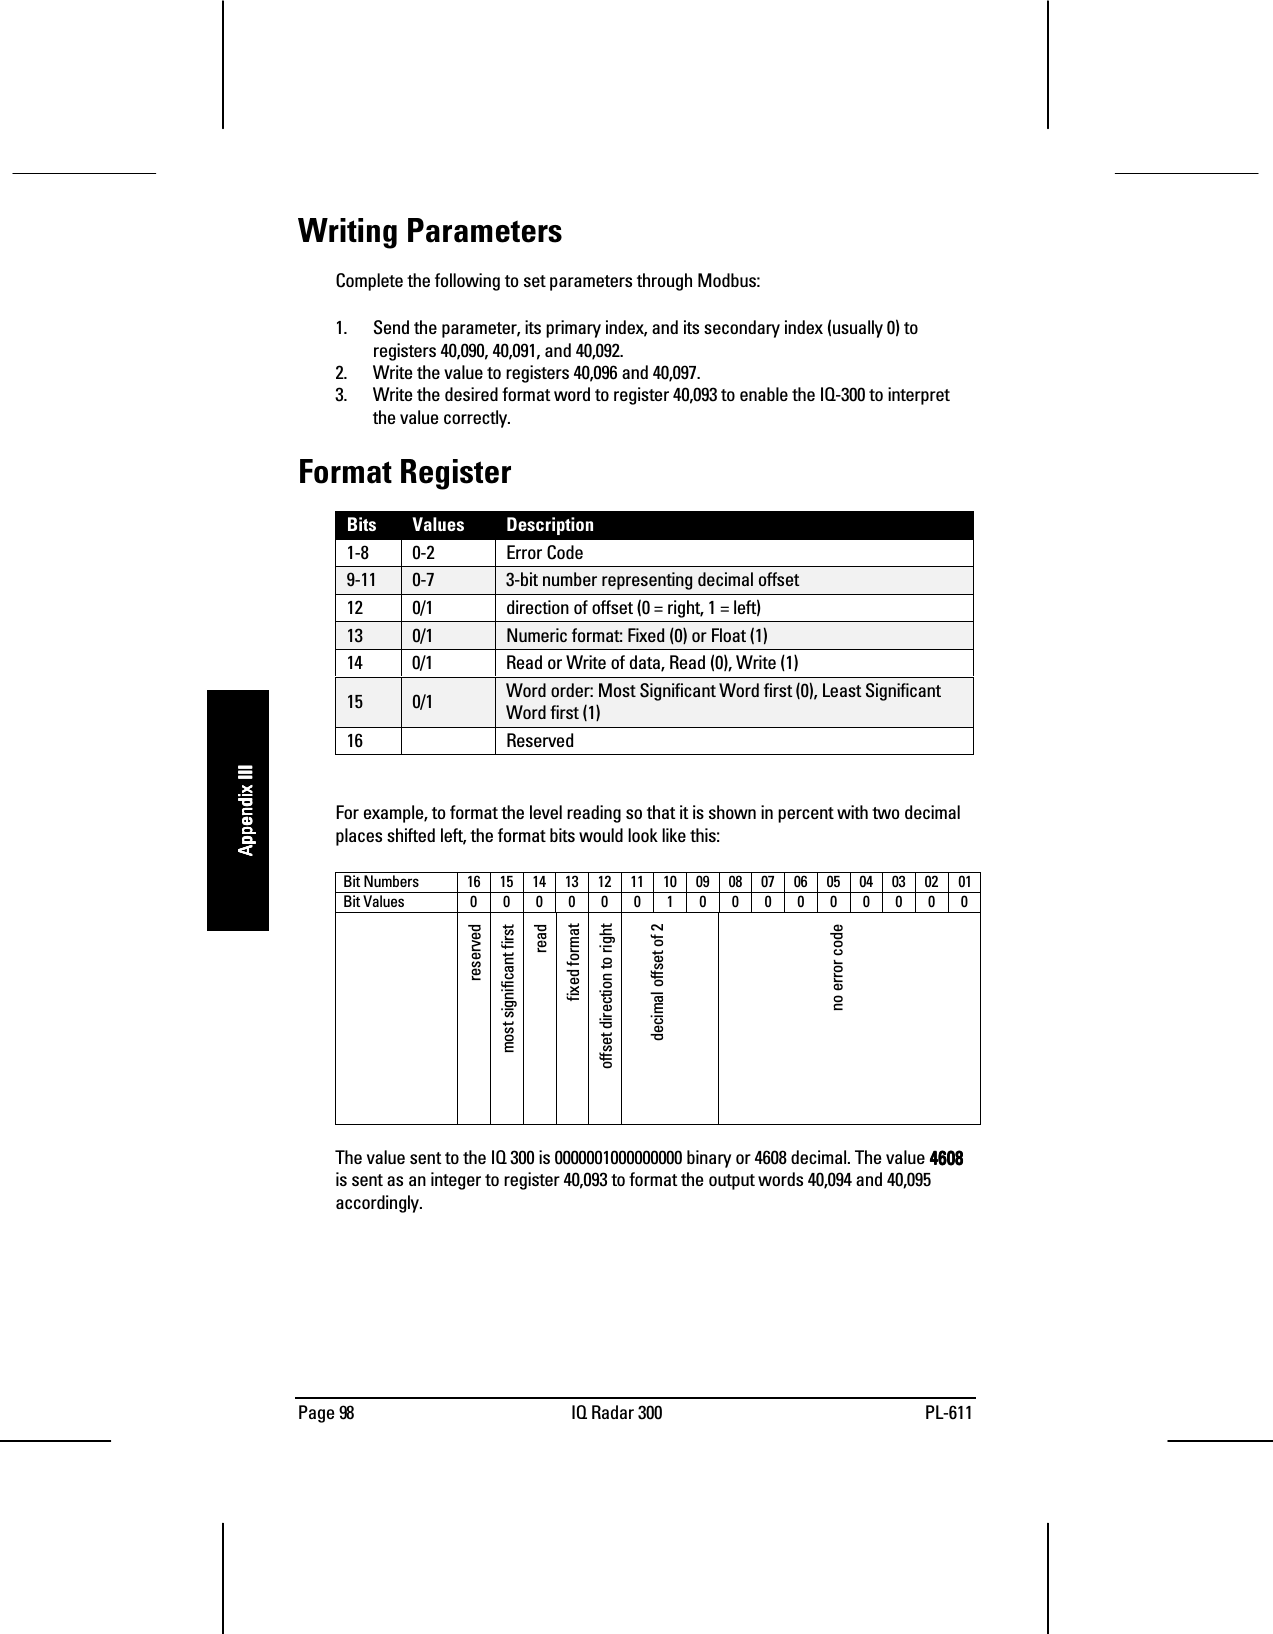 Page 98 IQ Radar 300 PL-611Appendix IIIAppendix IIIAppendix IIIAppendix IIIWriting ParametersComplete the following to set parameters through Modbus:1. Send the parameter, its primary index, and its secondary index (usually 0) toregisters 40,090, 40,091, and 40,092.2. Write the value to registers 40,096 and 40,097.3. Write the desired format word to register 40,093 to enable the IQ-300 to interpretthe value correctly.Format RegisterBits Values Description1-8 0-2 Error Code9-11 0-7 3-bit number representing decimal offset12 0/1 direction of offset (0 = right, 1 = left)13 0/1 Numeric format: Fixed (0) or Float (1)14 0/1 Read or Write of data, Read (0), Write (1)15 0/1 Word order: Most Significant Word first (0), Least SignificantWord first (1)16 ReservedFor example, to format the level reading so that it is shown in percent with two decimalplaces shifted left, the format bits would look like this:Bit Numbers 16151413121110090807060504030201Bit Values 0000001000000000reservedmost significant firstreadfixed formatoffset direction to rightdecimal offset of 2no error codeThe value sent to the IQ 300 is 0000001000000000 binary or 4608 decimal. The value 4608460846084608is sent as an integer to register 40,093 to format the output words 40,094 and 40,095accordingly.